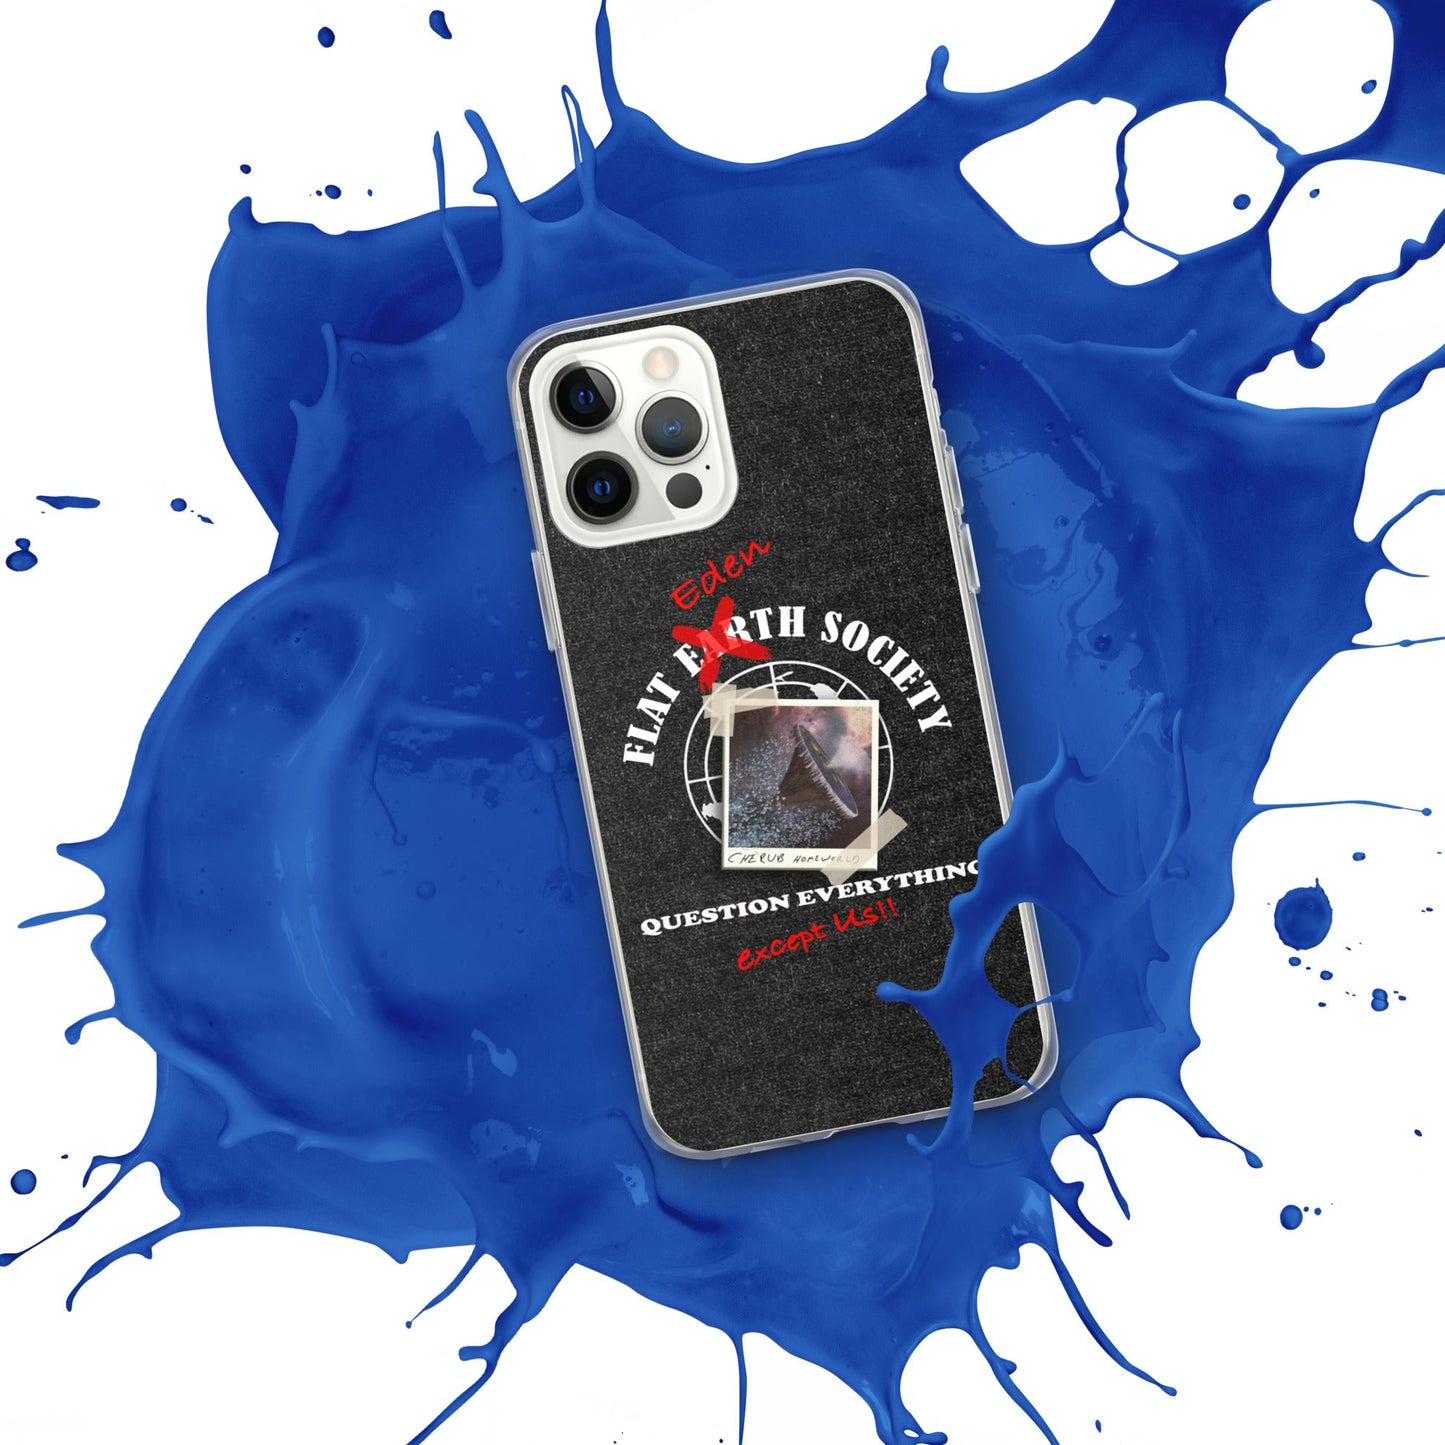 iPhone Case | Intergalactic Space Force 2 | Flat Eden Society - Spectral Ink Shop - Mobile Phone Cases -9780728_11705